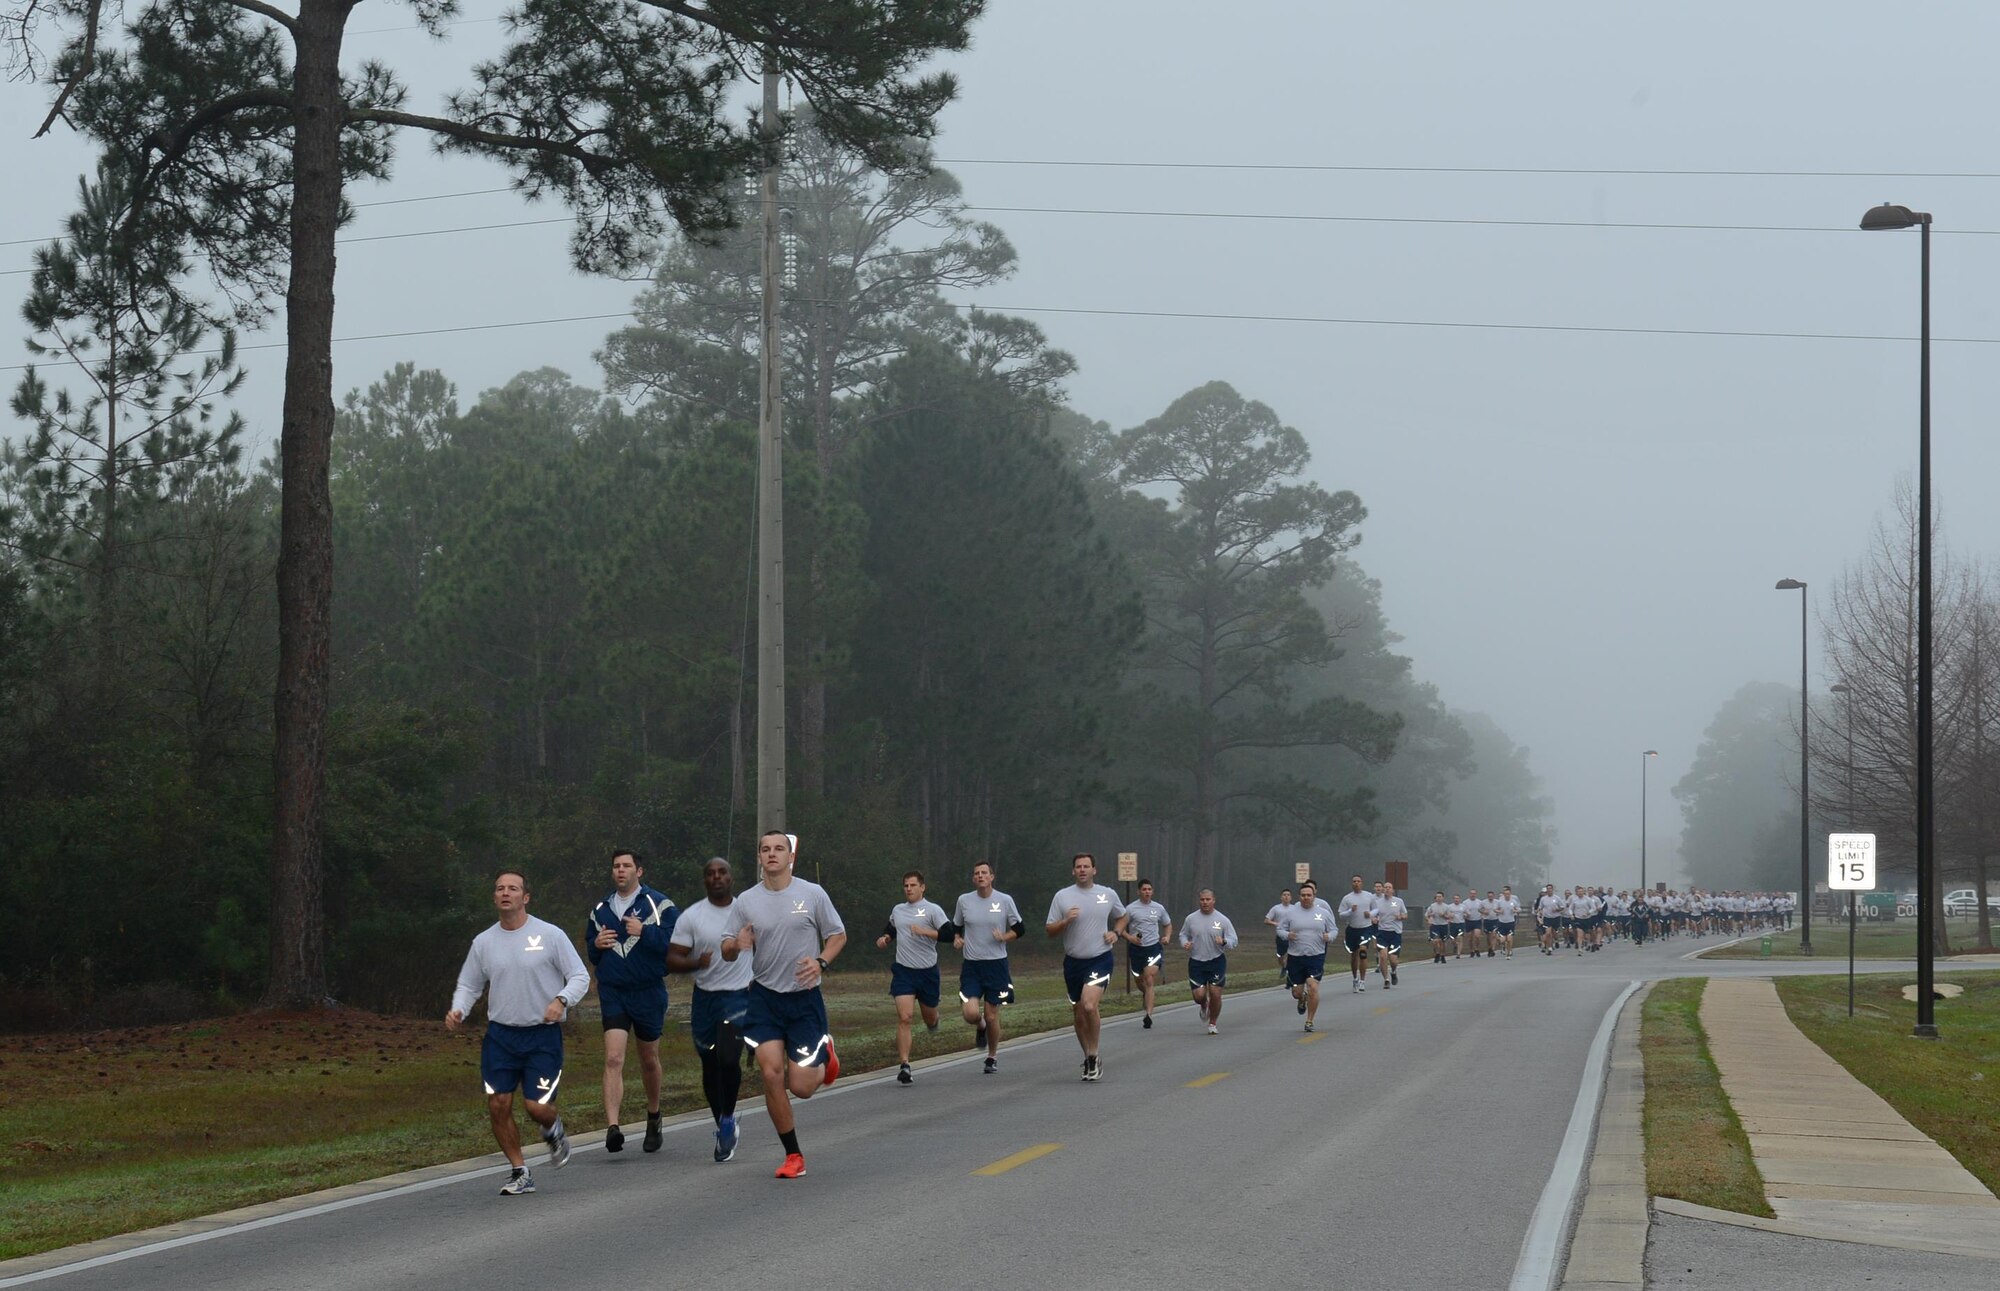 Air Commando begin the Command Run at Hurlburt Field, Fla., Feb. 3, 2017. The Air Force Special Operations Command staff meets monthly to run a 5K. (U.S. Air Force photo/Staff Sgt. Melanie Holochwost)